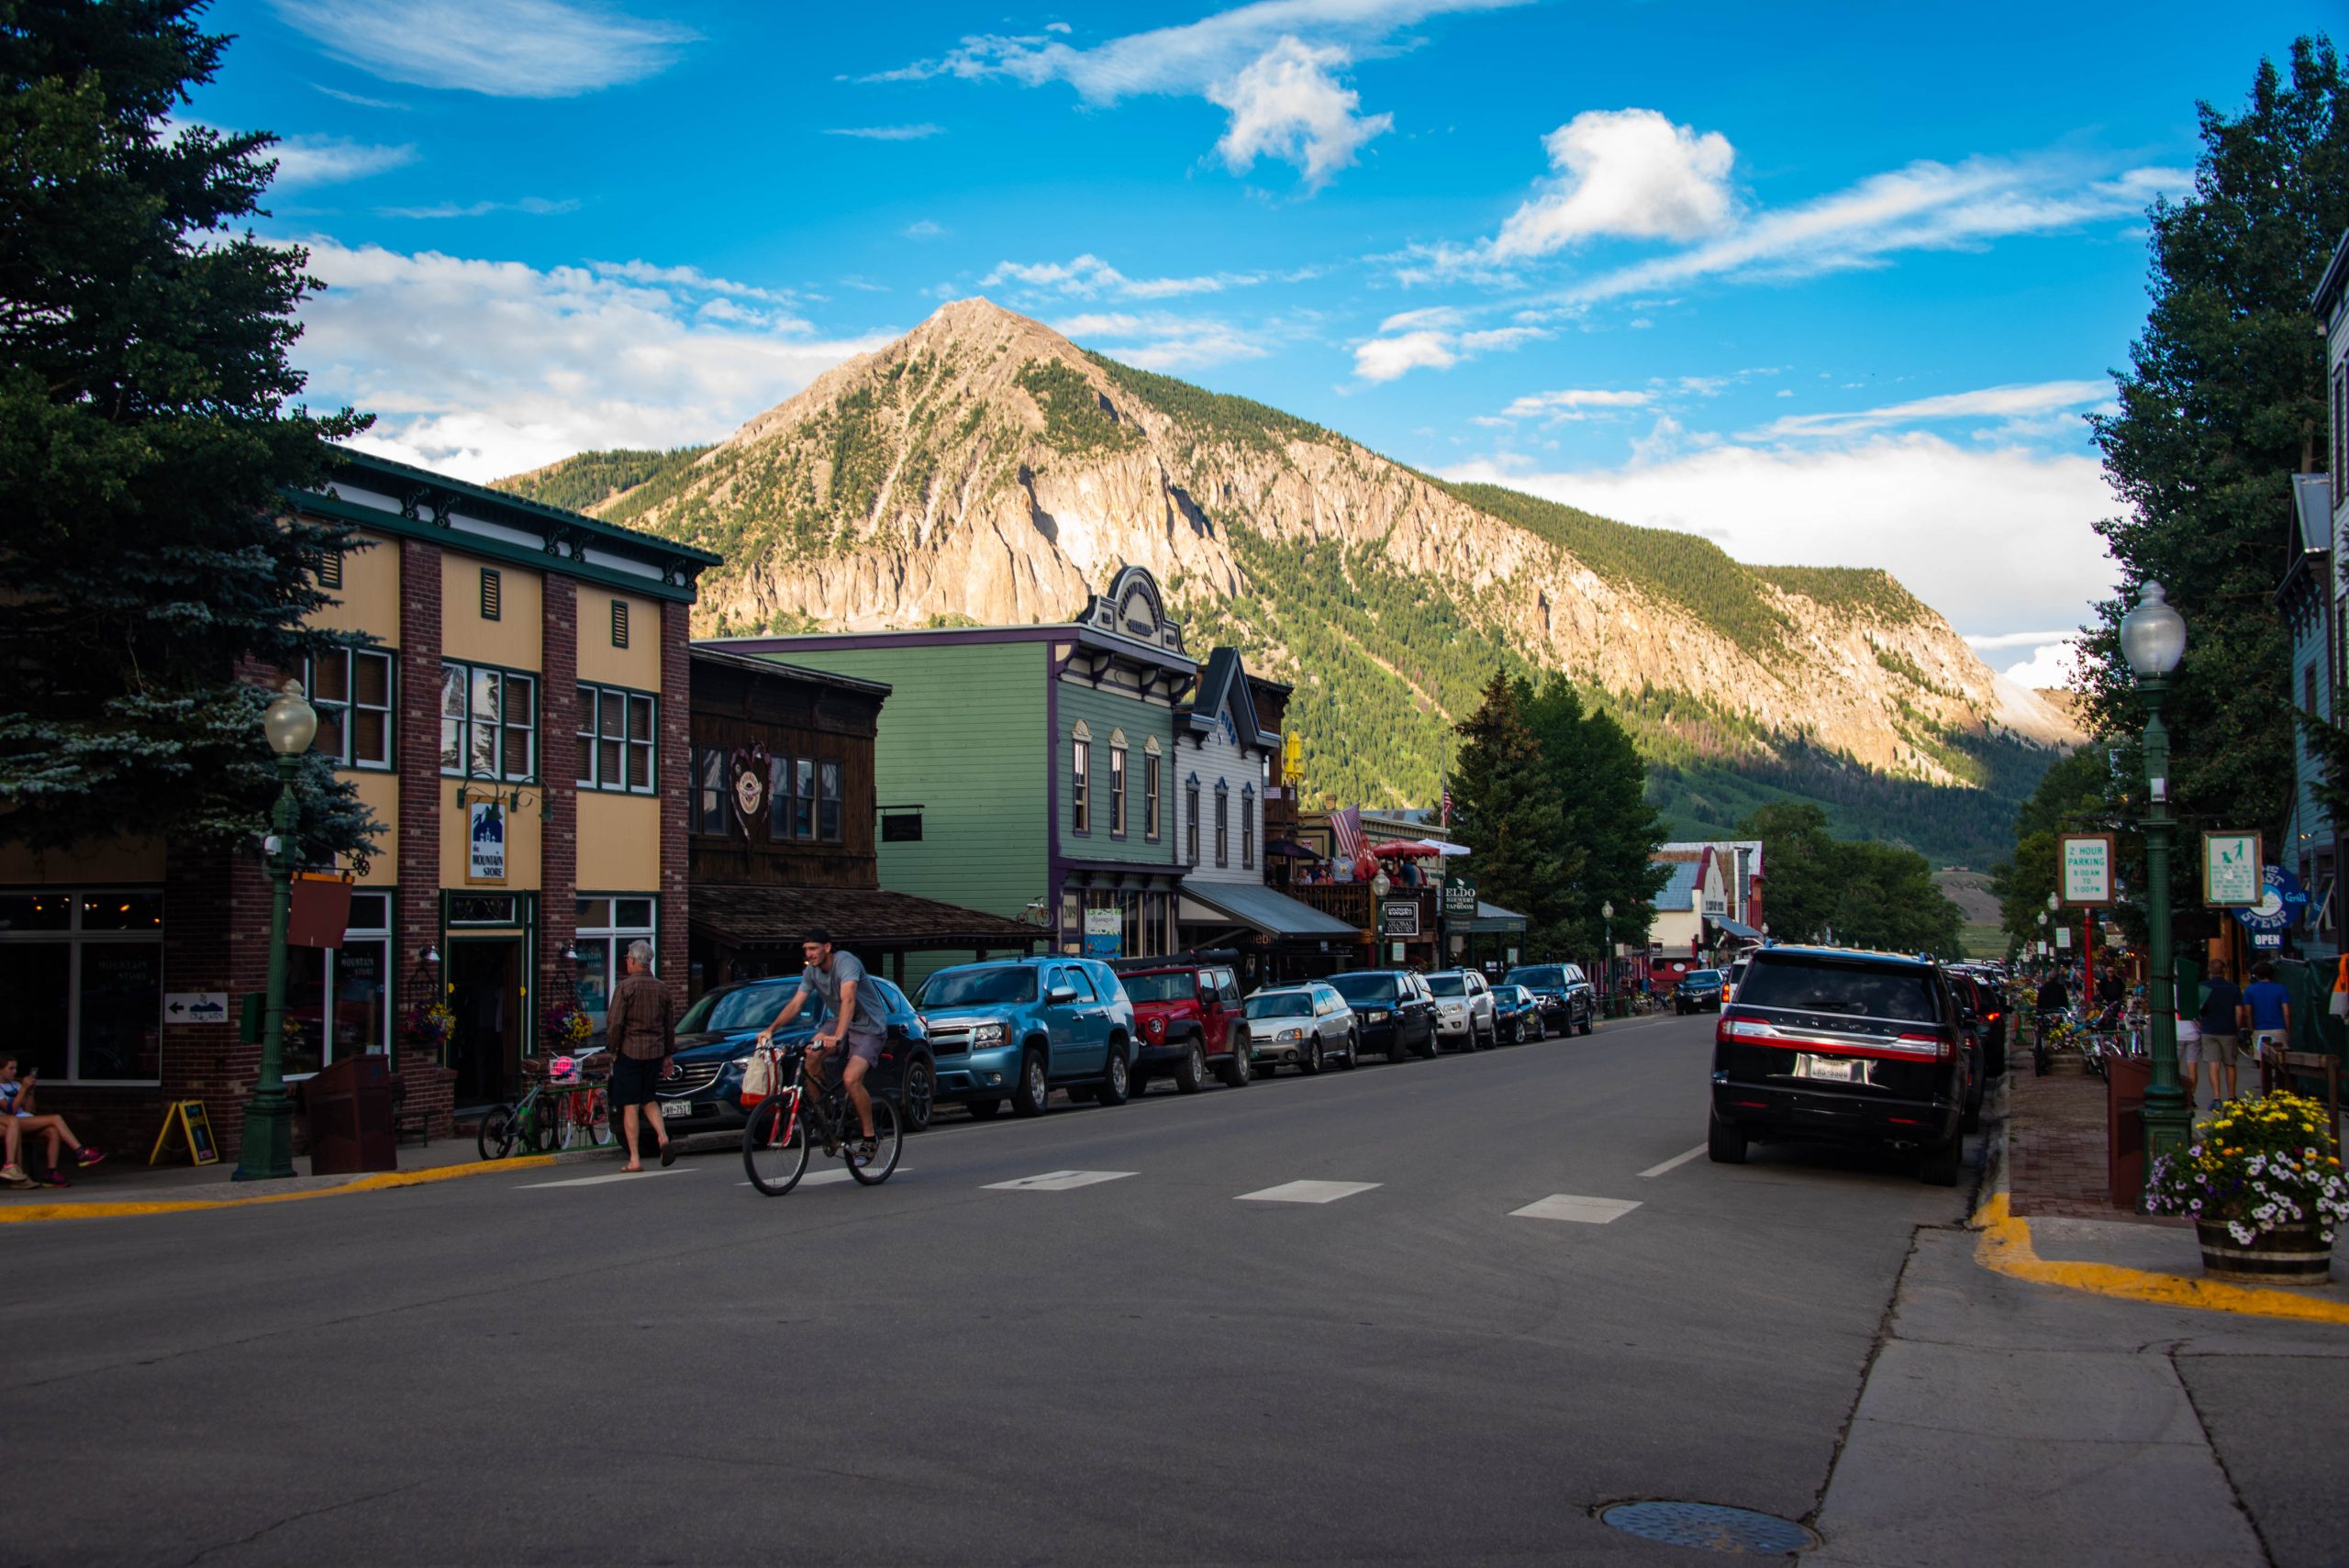 A view of downtown Crested Butte, Colorado with some shops, restaurants, and bars under mountain view. Someone is biking down the road.